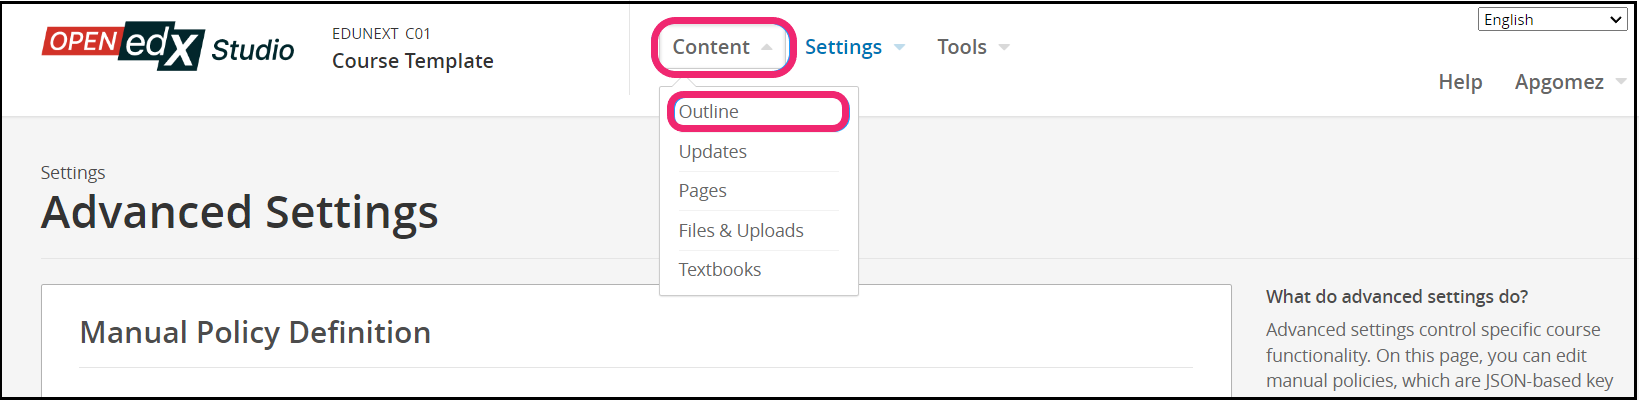 This image shows the Content tab and the Outline option.